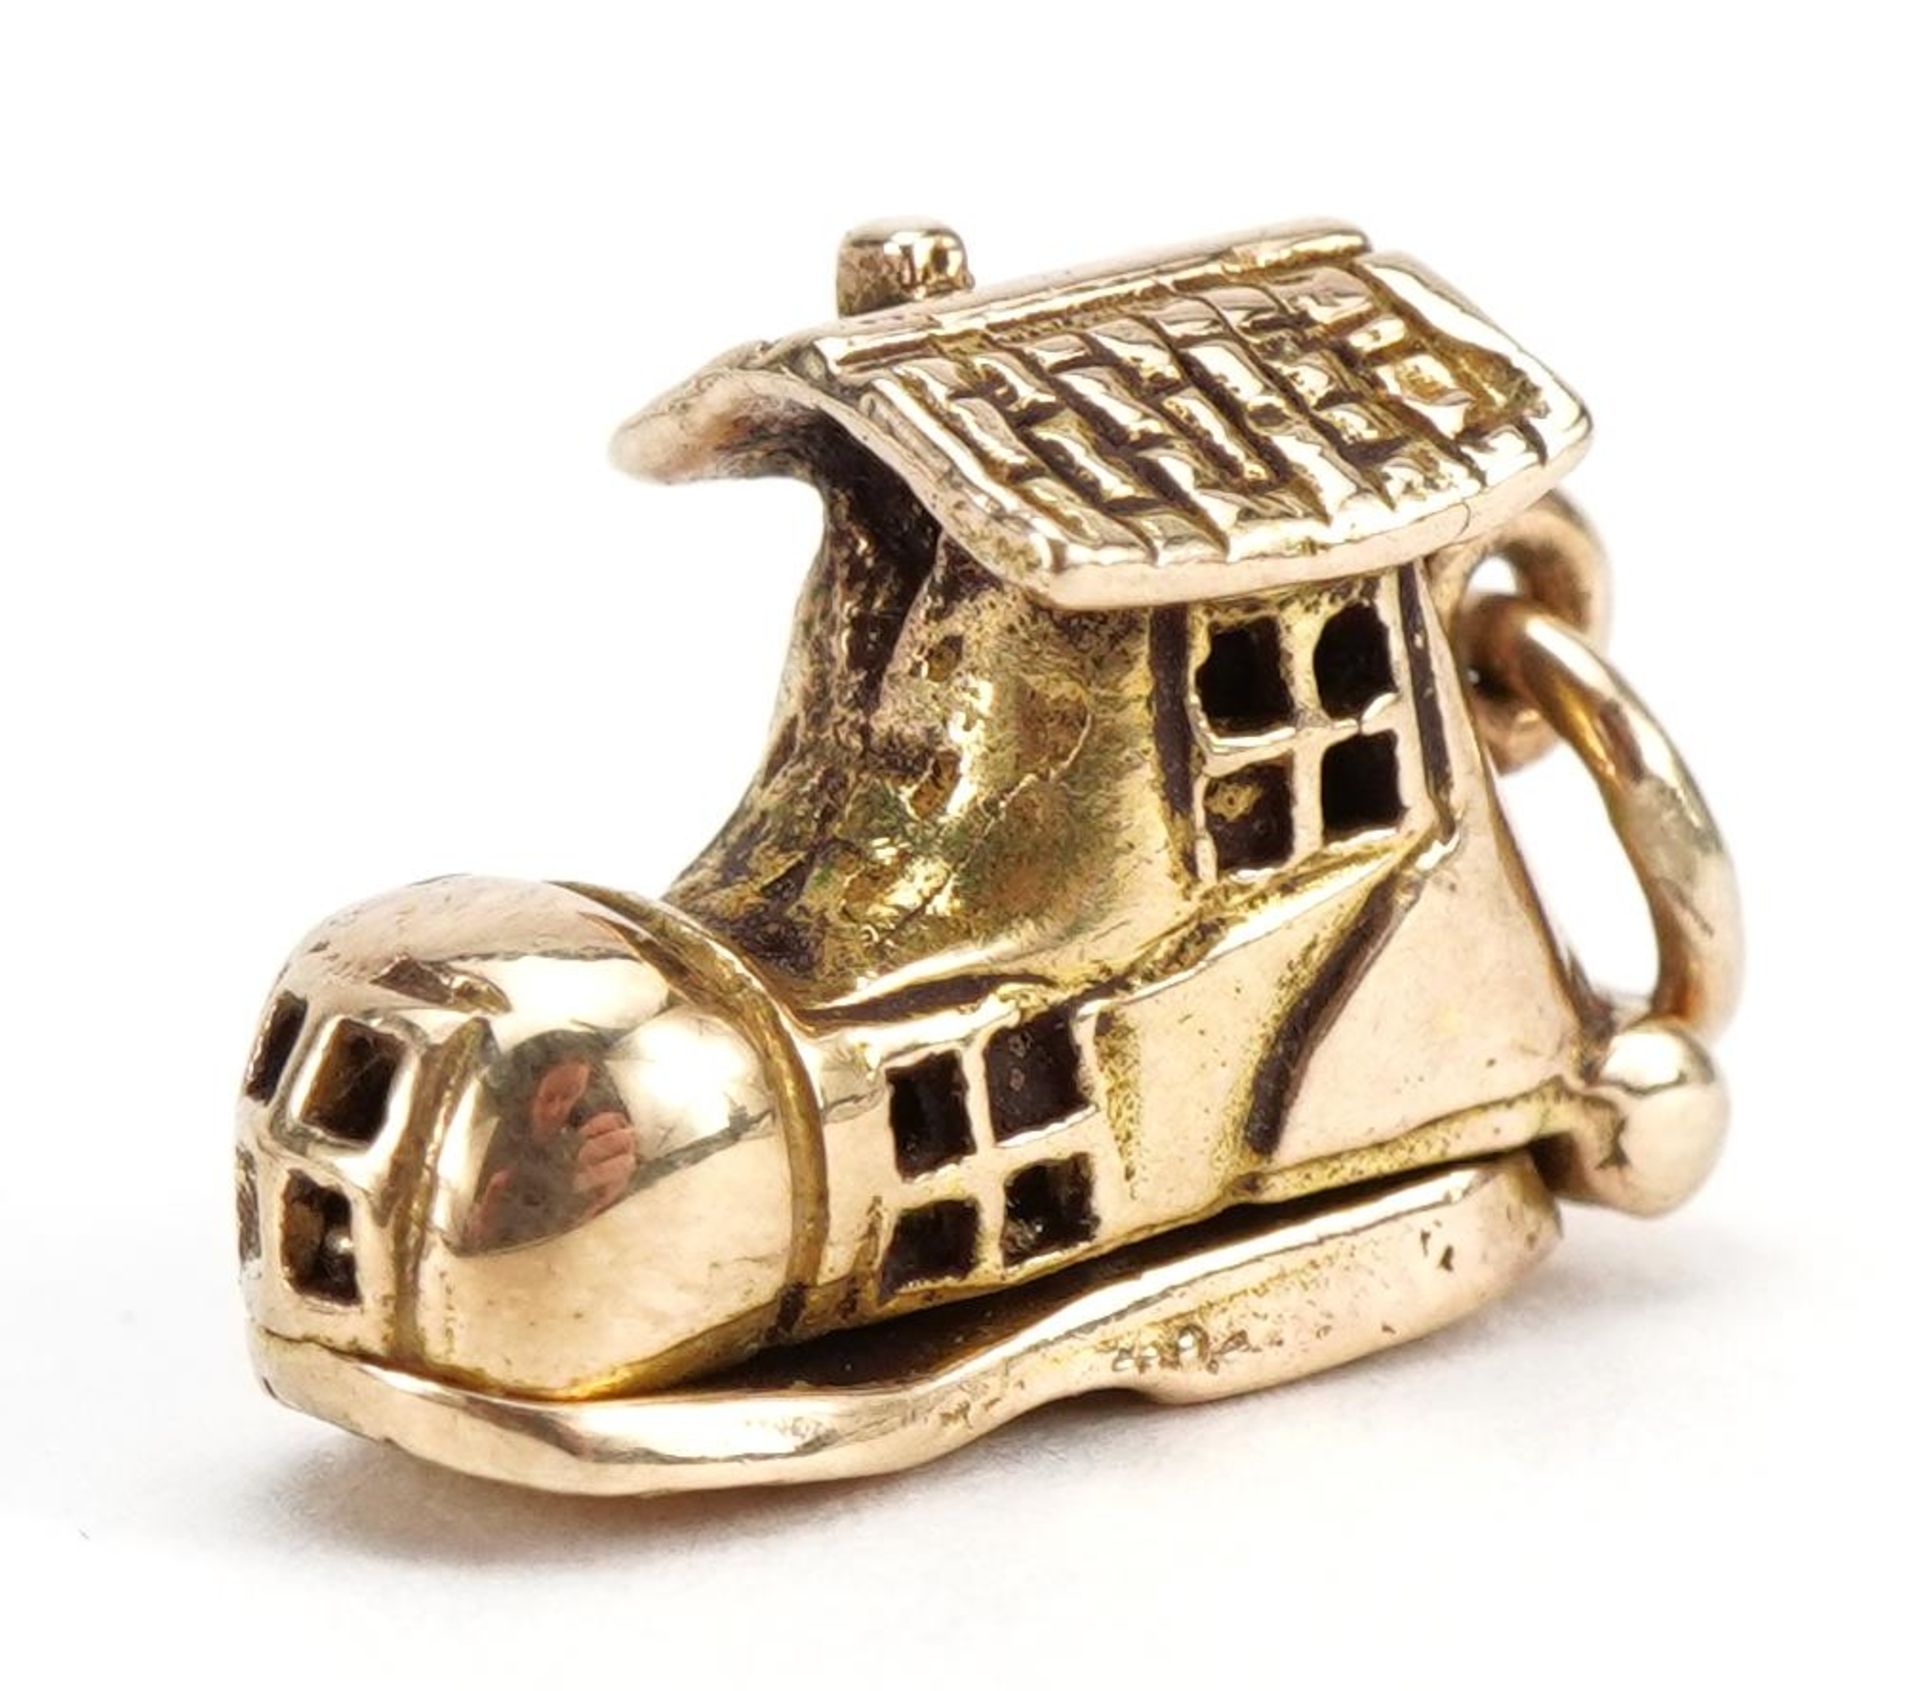 9ct gold shoe charm opening to reveal enamelled figures, 1.5cm wide, 2.7g - Bild 2 aus 3